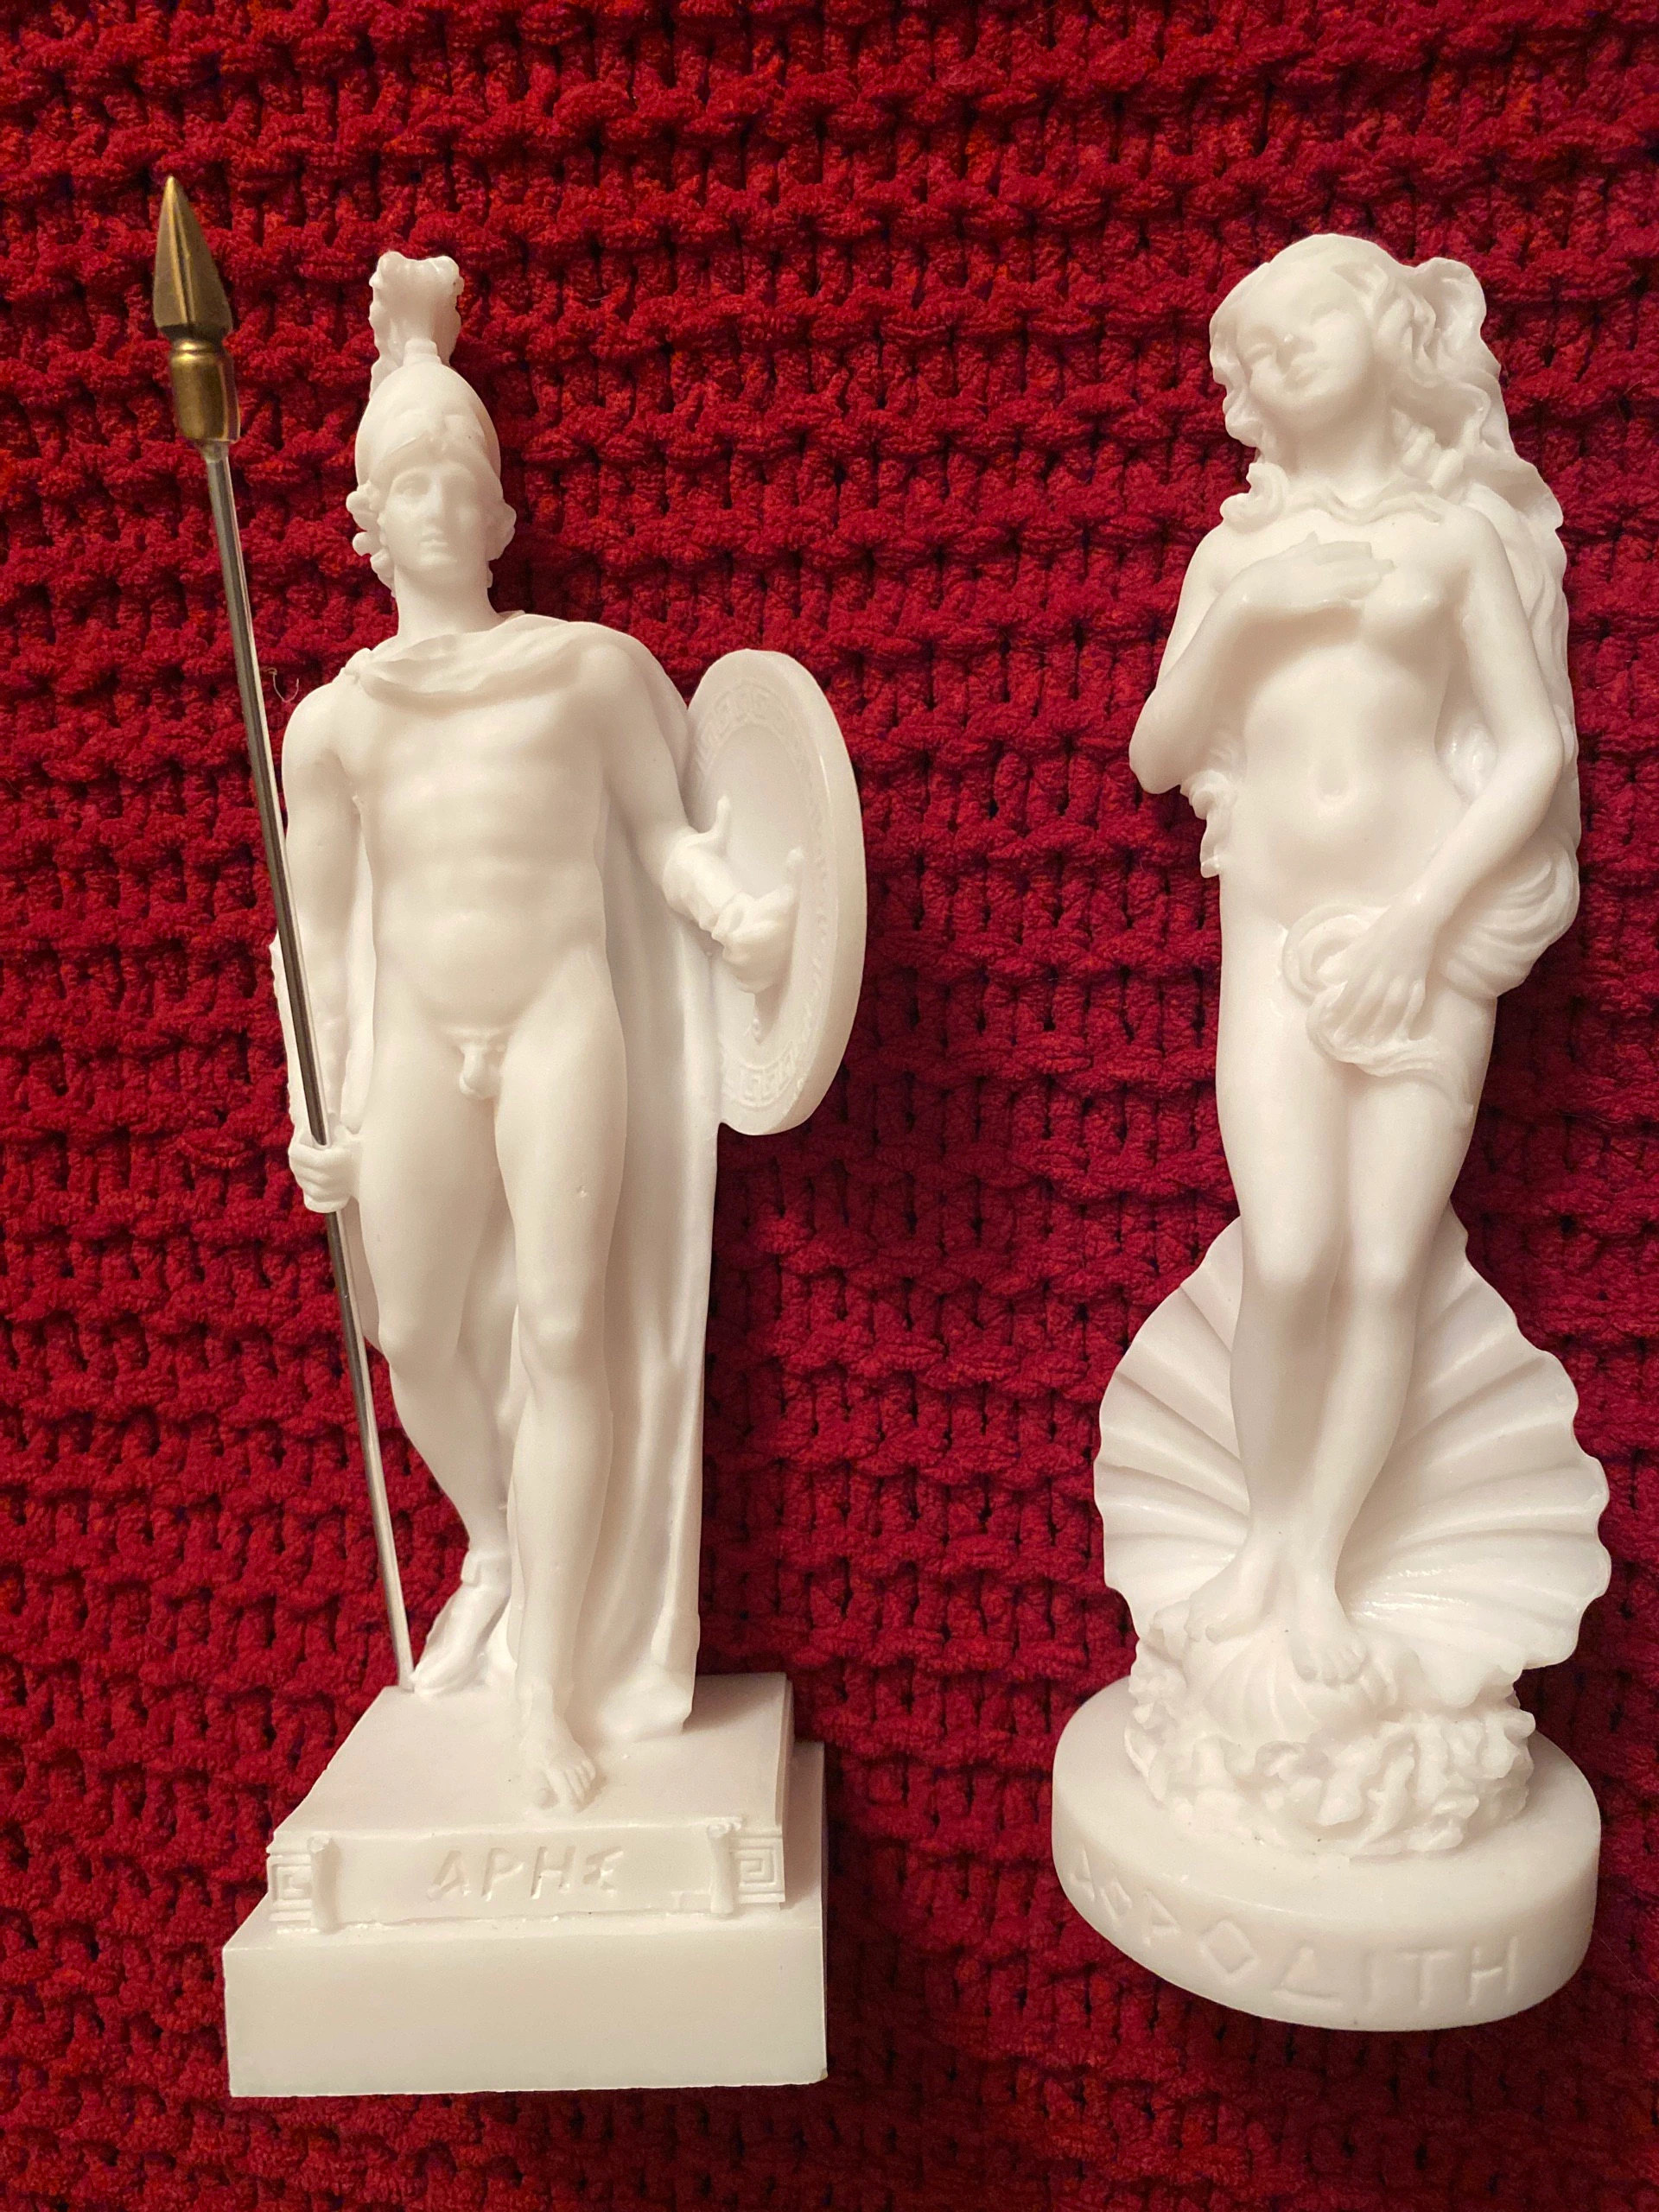 Ares Greek God 3-788-w and Botticelli's Aphrodite 2-022-w from eStatueShop  (customer's photo)